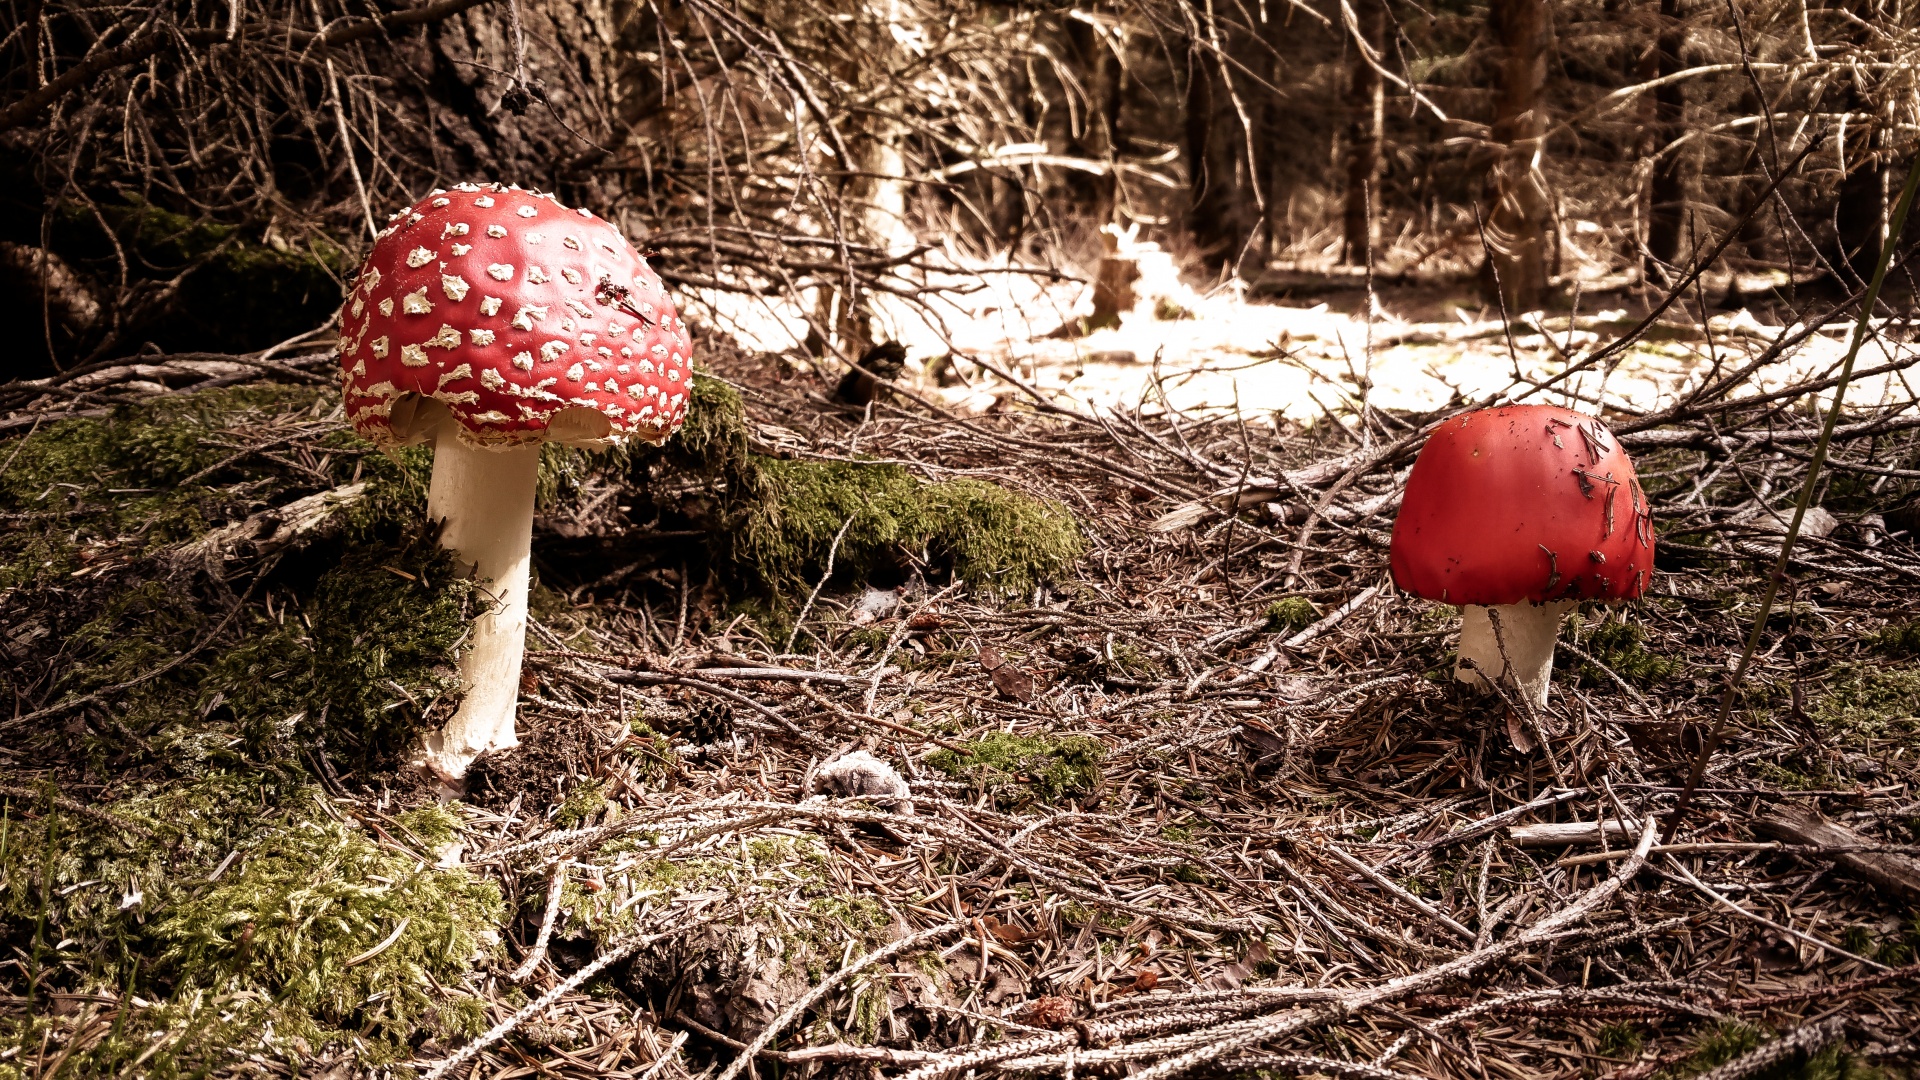 Amanita muscaria growing in a forest